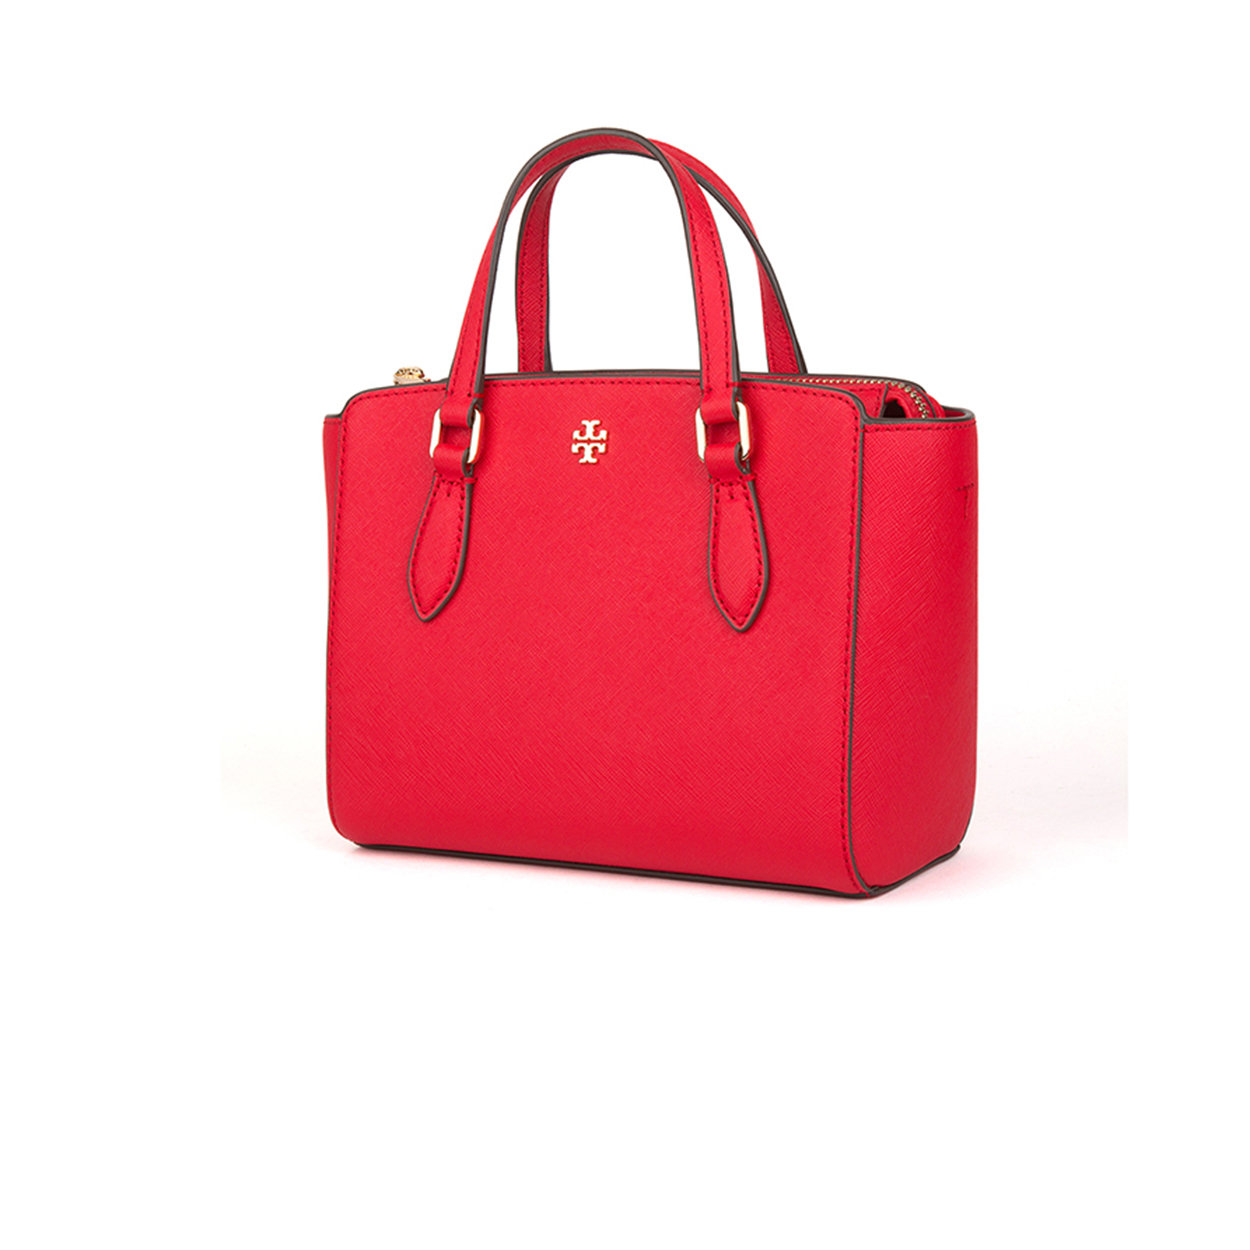 Emerson Mini Top Zip Tote Bag red - Tory Burch - Purchase on Ventis.